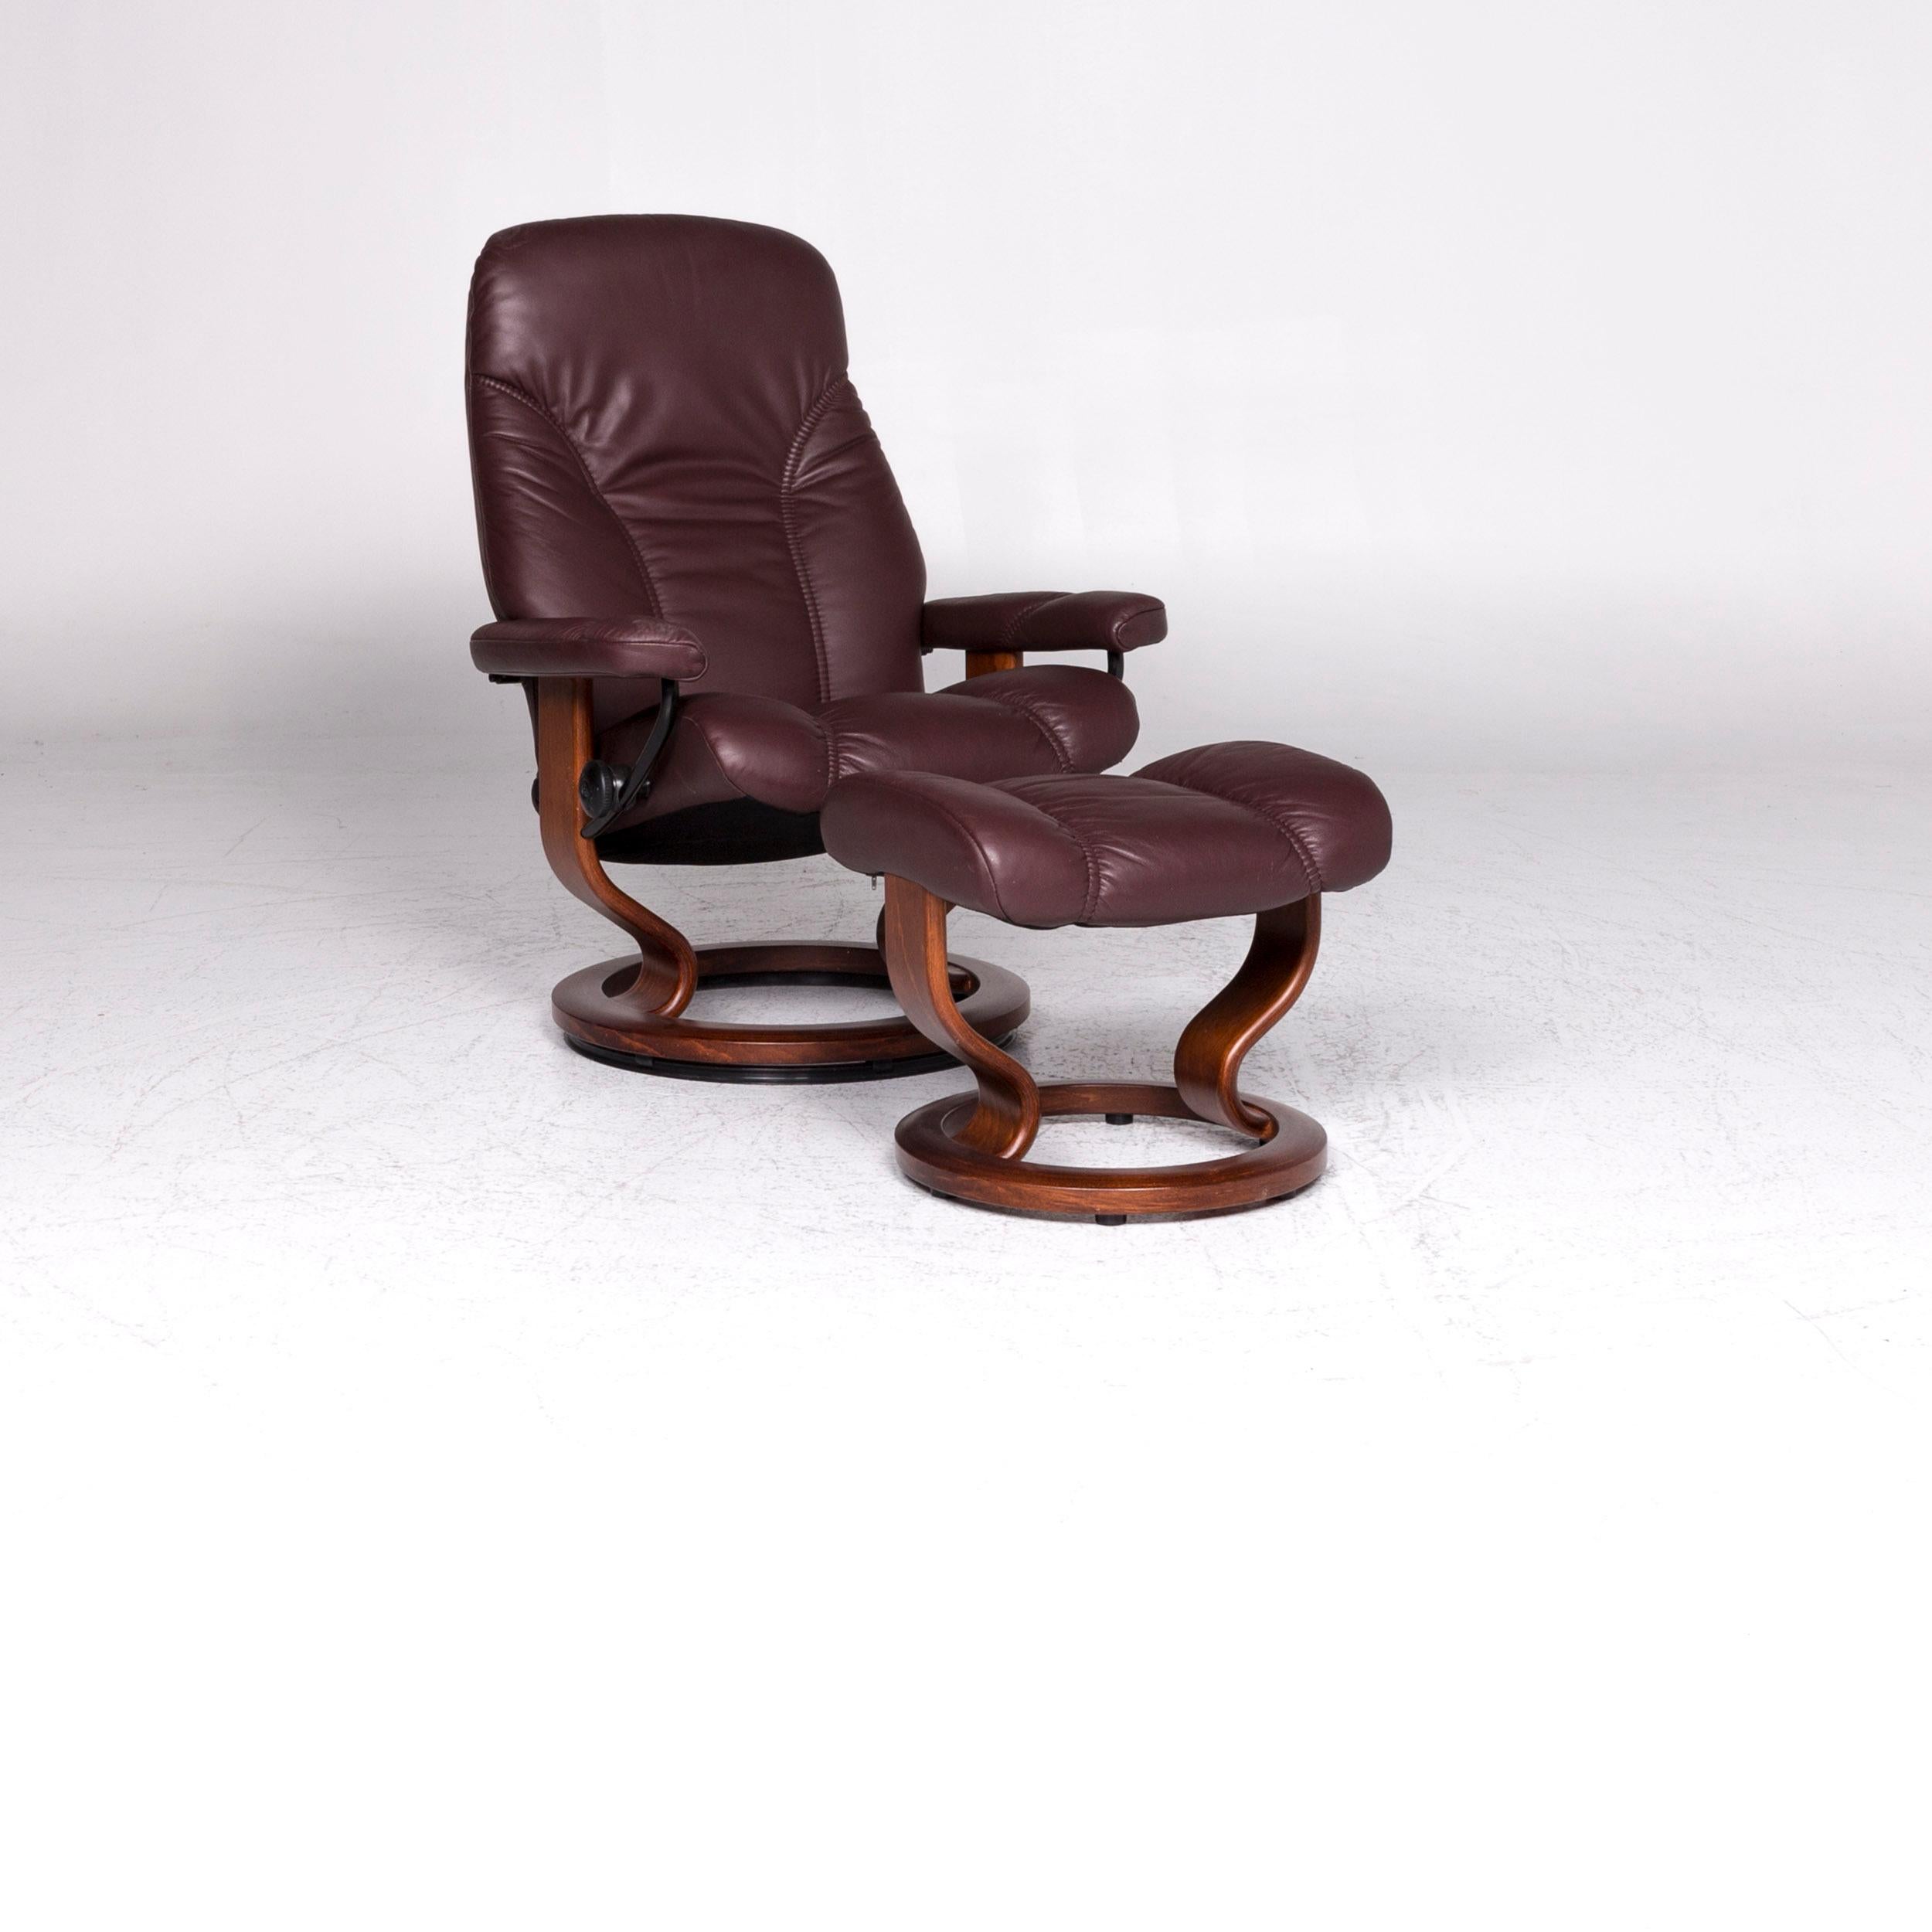 We bring to you a Stressless consul leather armchair stool red-brown relax function.
 

Product measurements in centimetres:
 

Depth 82
Width 73
Height 73
Seat-height 42
Rest-height 52
Seat-depth 46
Seat-width 55
Back-height 61.
  